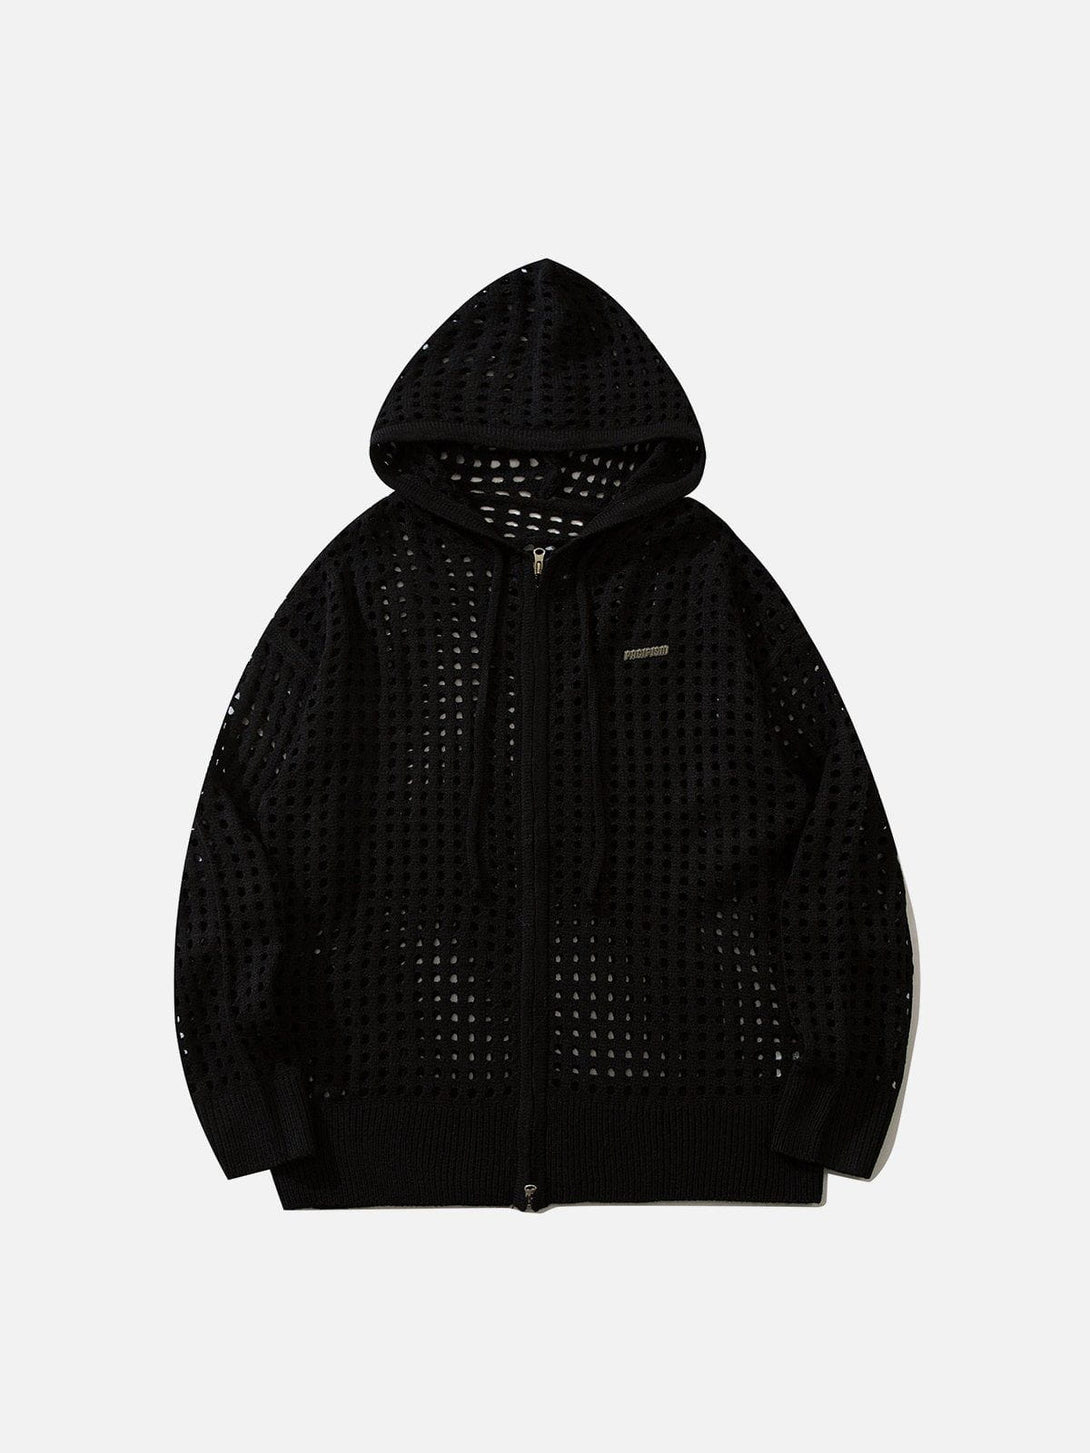 Levefly - Cutout Double Zip-up Pulls Hoodie - Streetwear Fashion - levefly.com